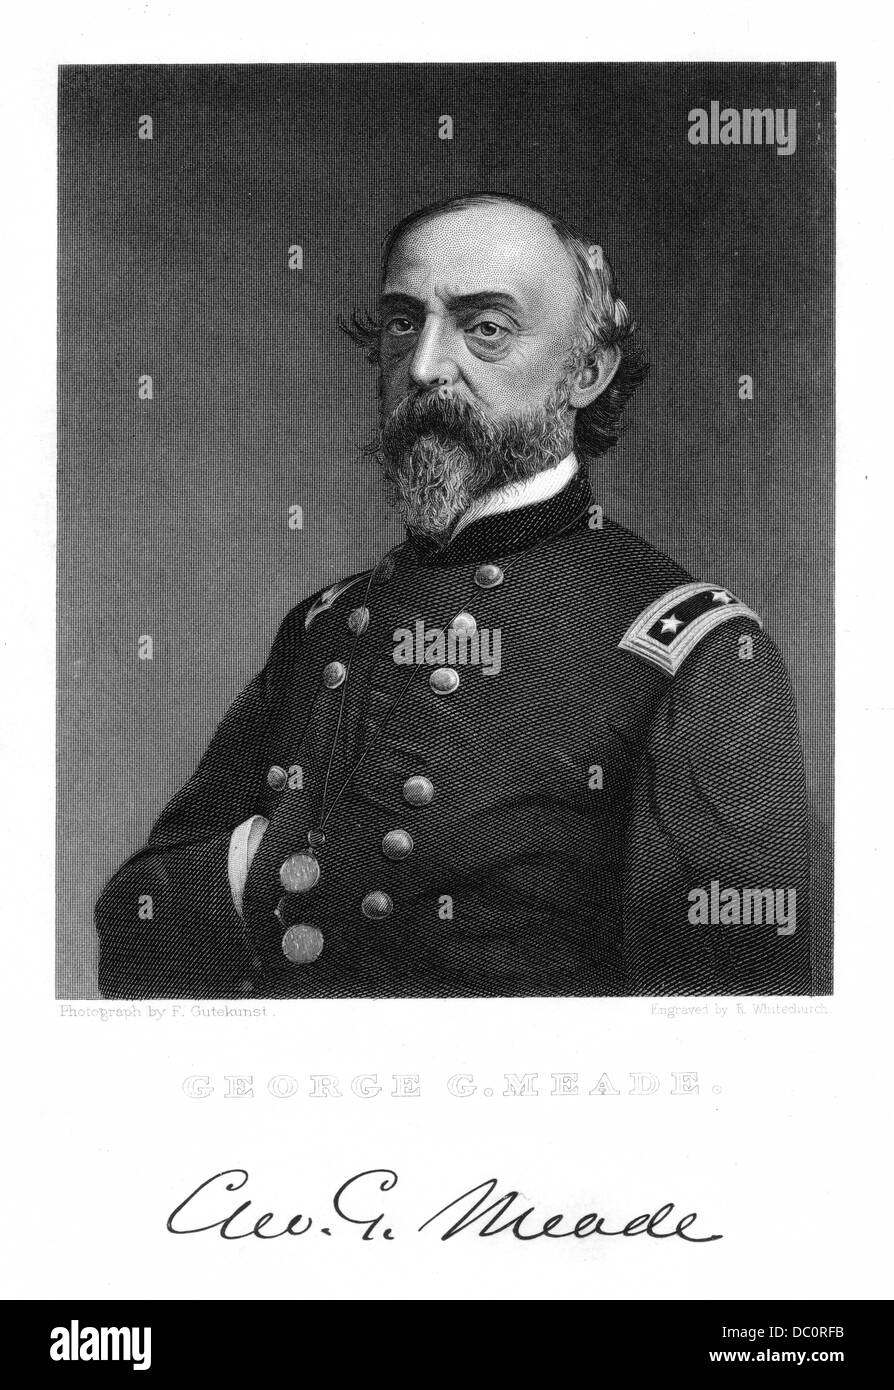 1800s 1860s PORTRAIT UNION ARMY GENERAL GEORGE G MEADE DURING AMERICAN CIVIL WAR DEFEATED ROBERT E LEE AT GETTYSBURG JULY 1863 Stock Photo